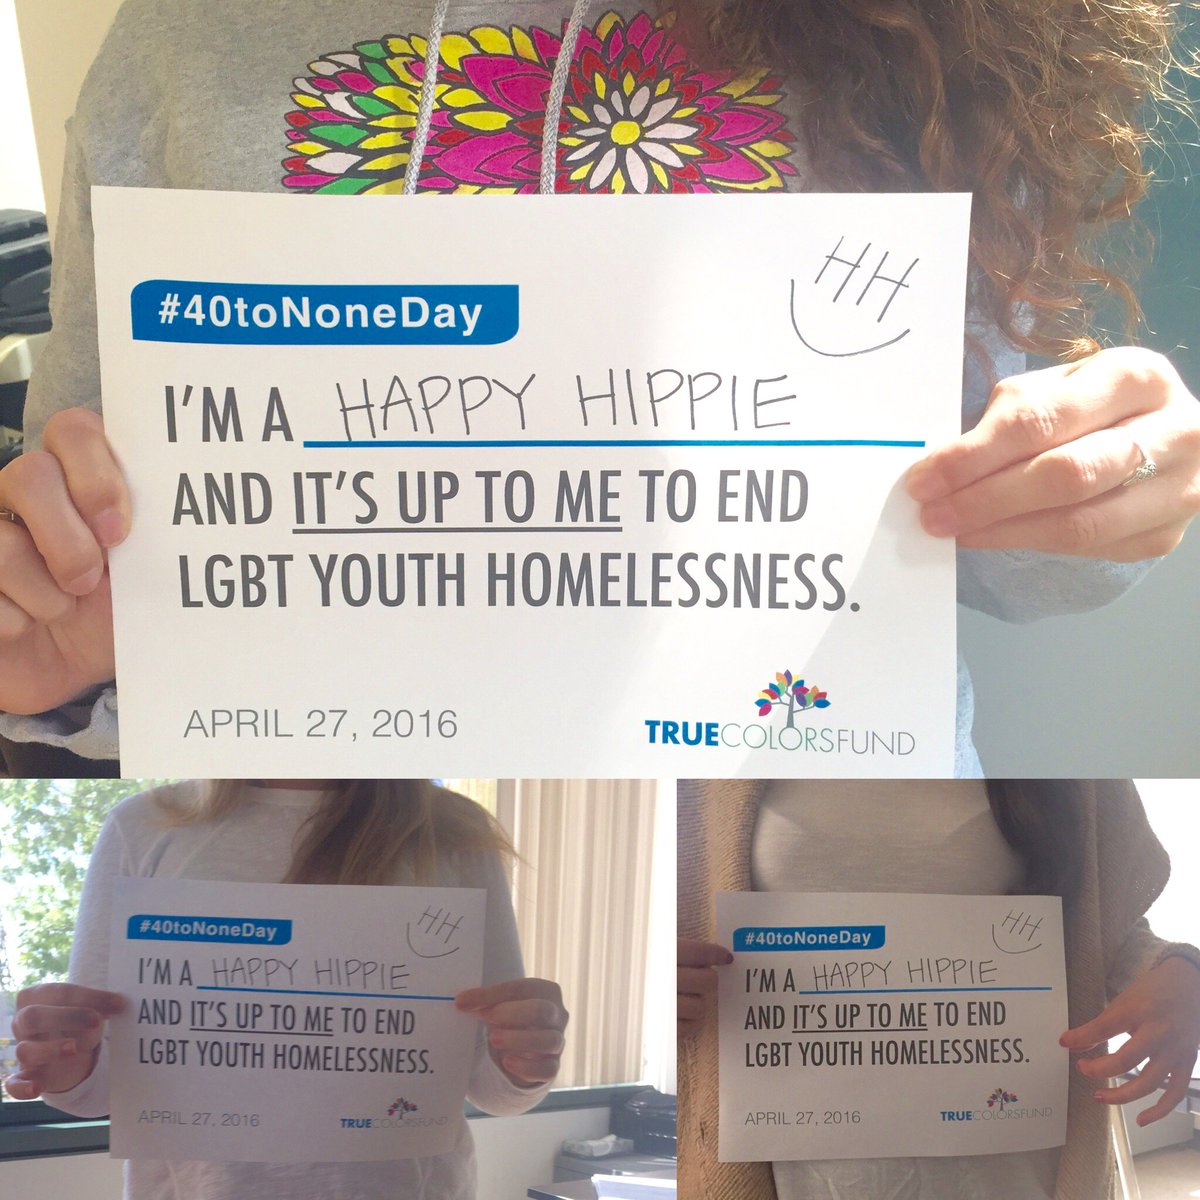 RT @happyhippiefdn: .@TrueColorsFund & #happyhippies are committed to ending LGBT youth homelessness. #40ToNoneDay https://t.co/AJDfjxZId6